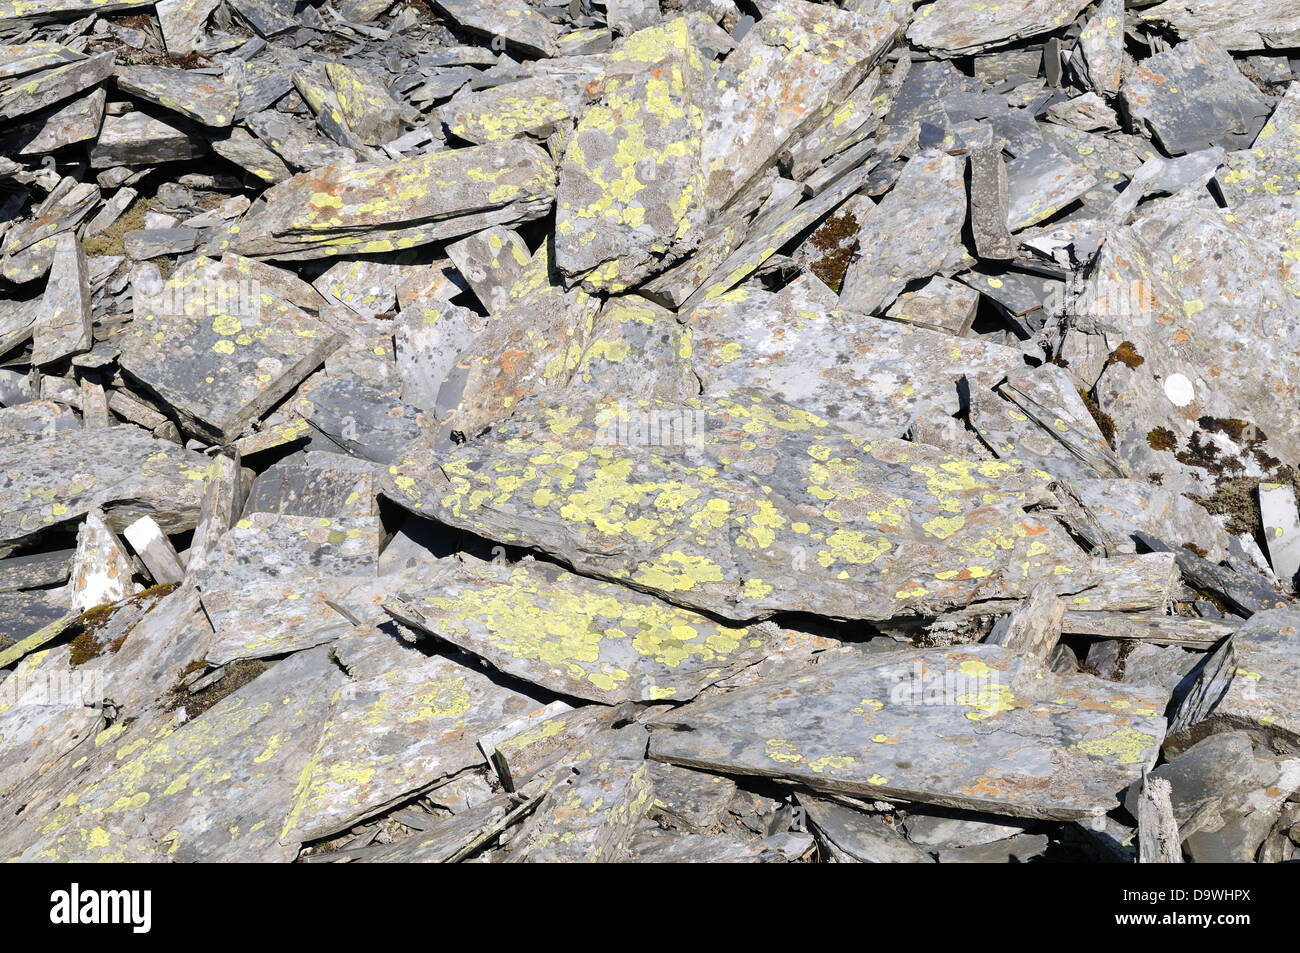 Slate spoil heaps covered with lichen at the disused Rhosydd Slate Mine in a mountain pass between Croesor and Cwmorthin Valleys Stock Photo